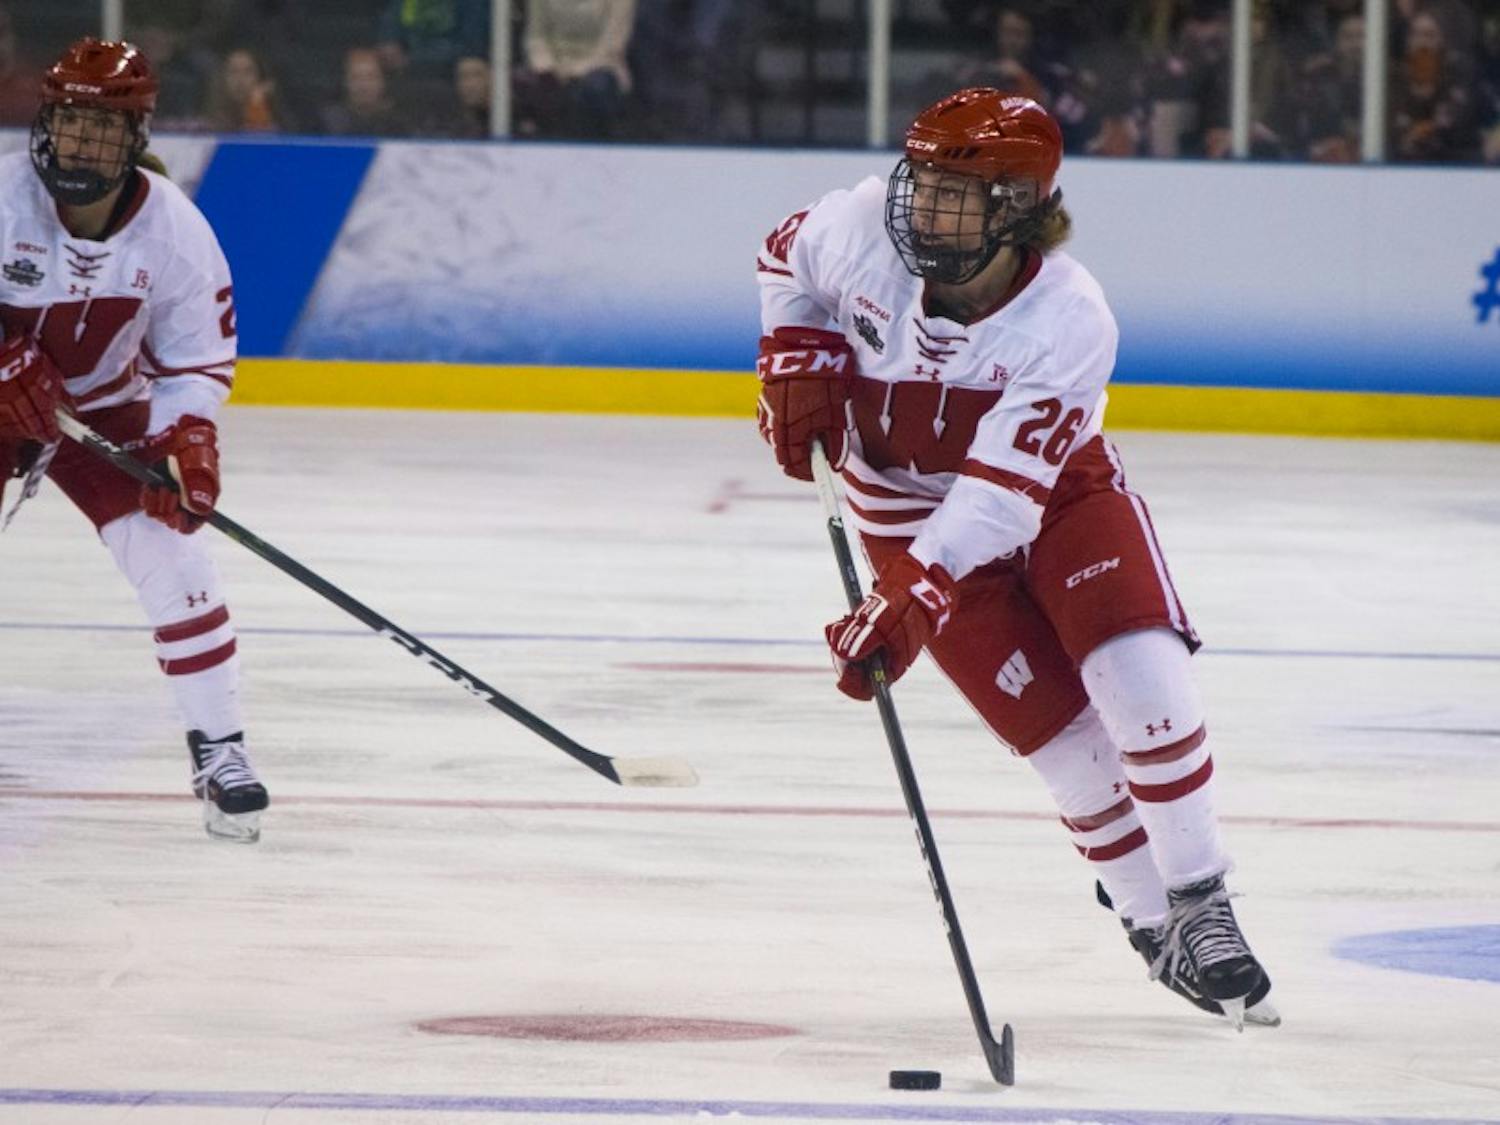 The Badgers stayed unbeaten this weekend, sweeping Bemidji State.